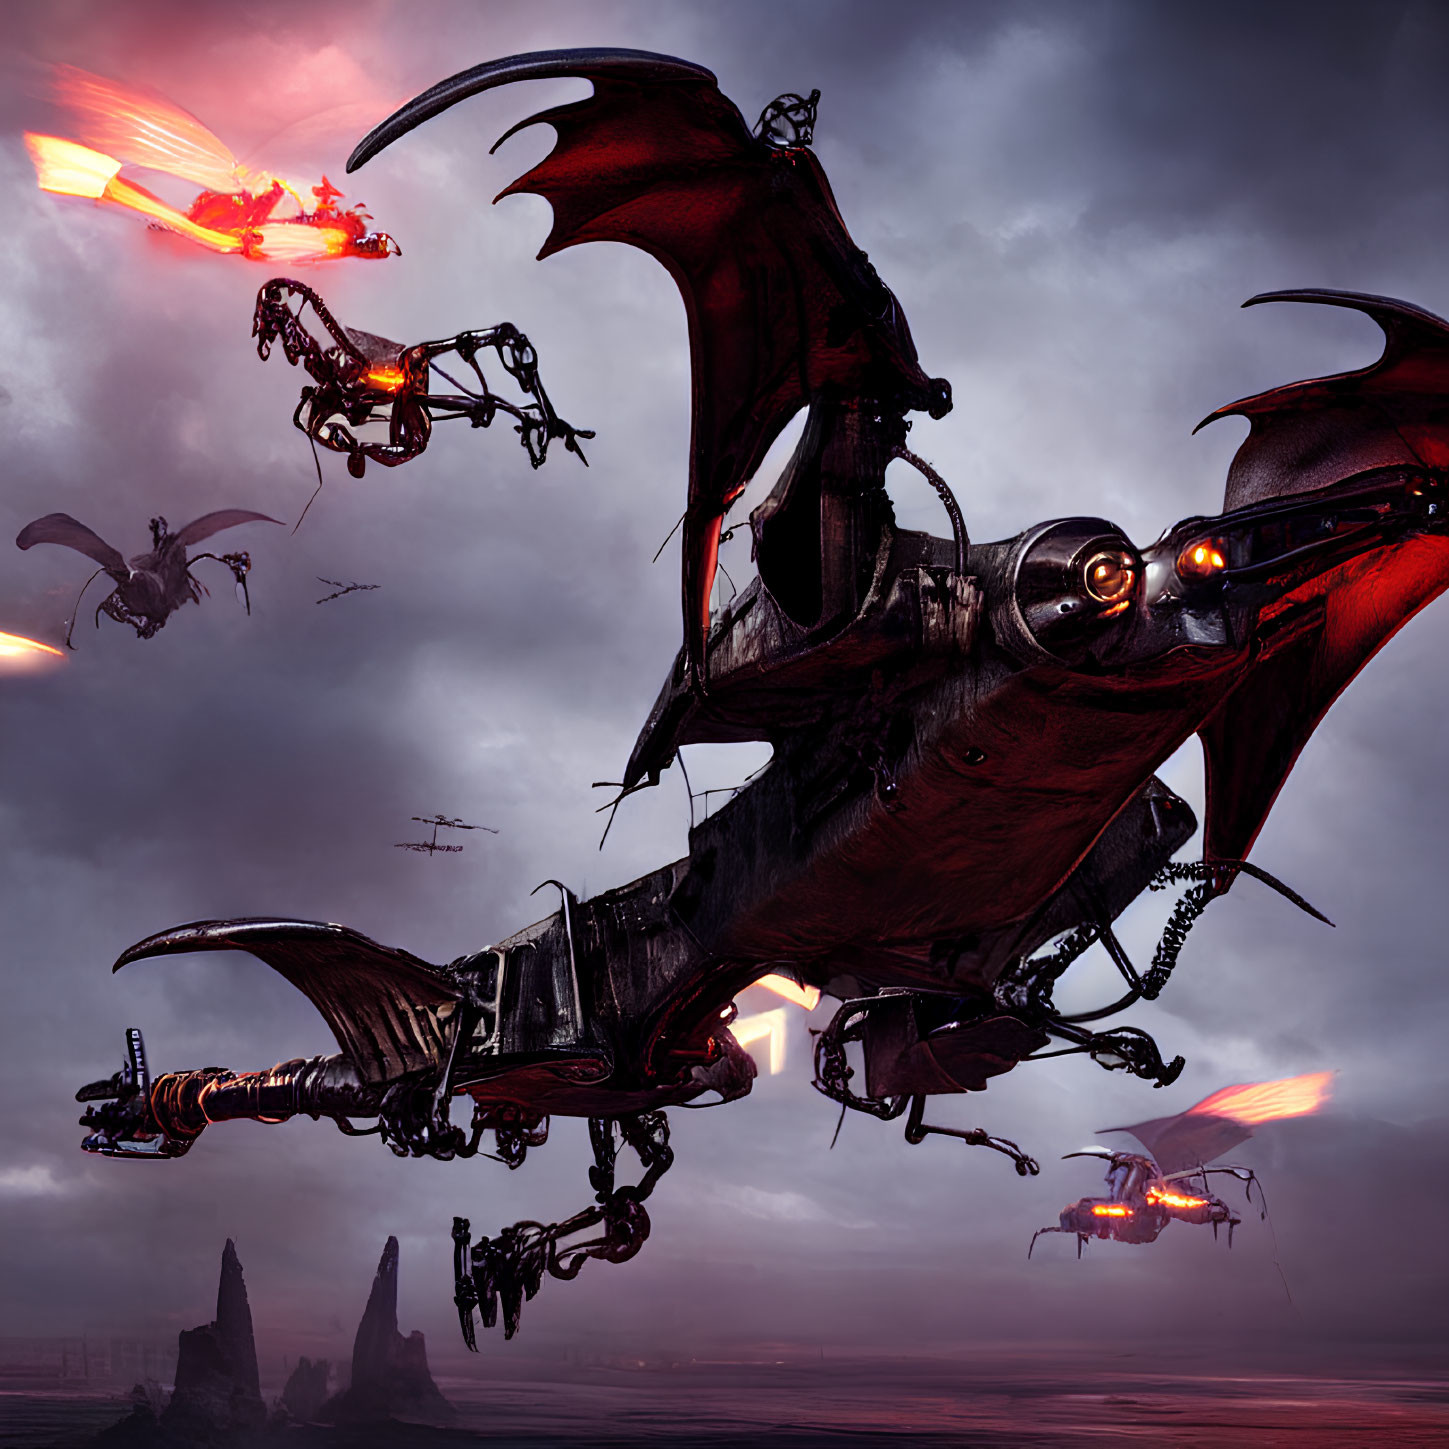 Mechanical dragons in stormy sky with fire blasts and silhouettes.